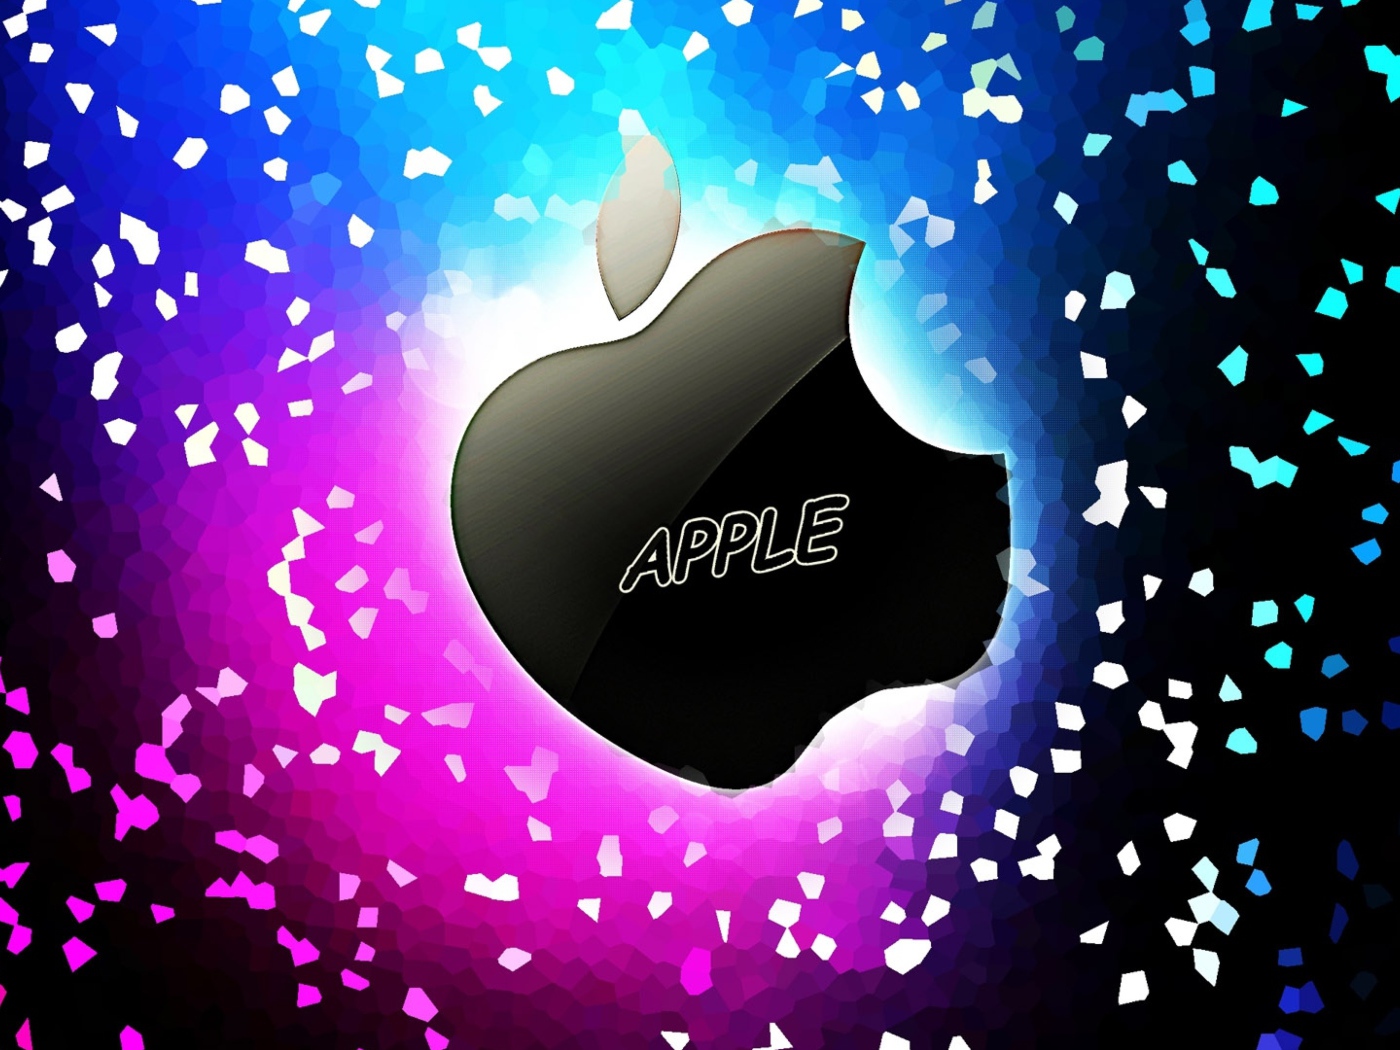 Black apple icon on a colorful neon background.